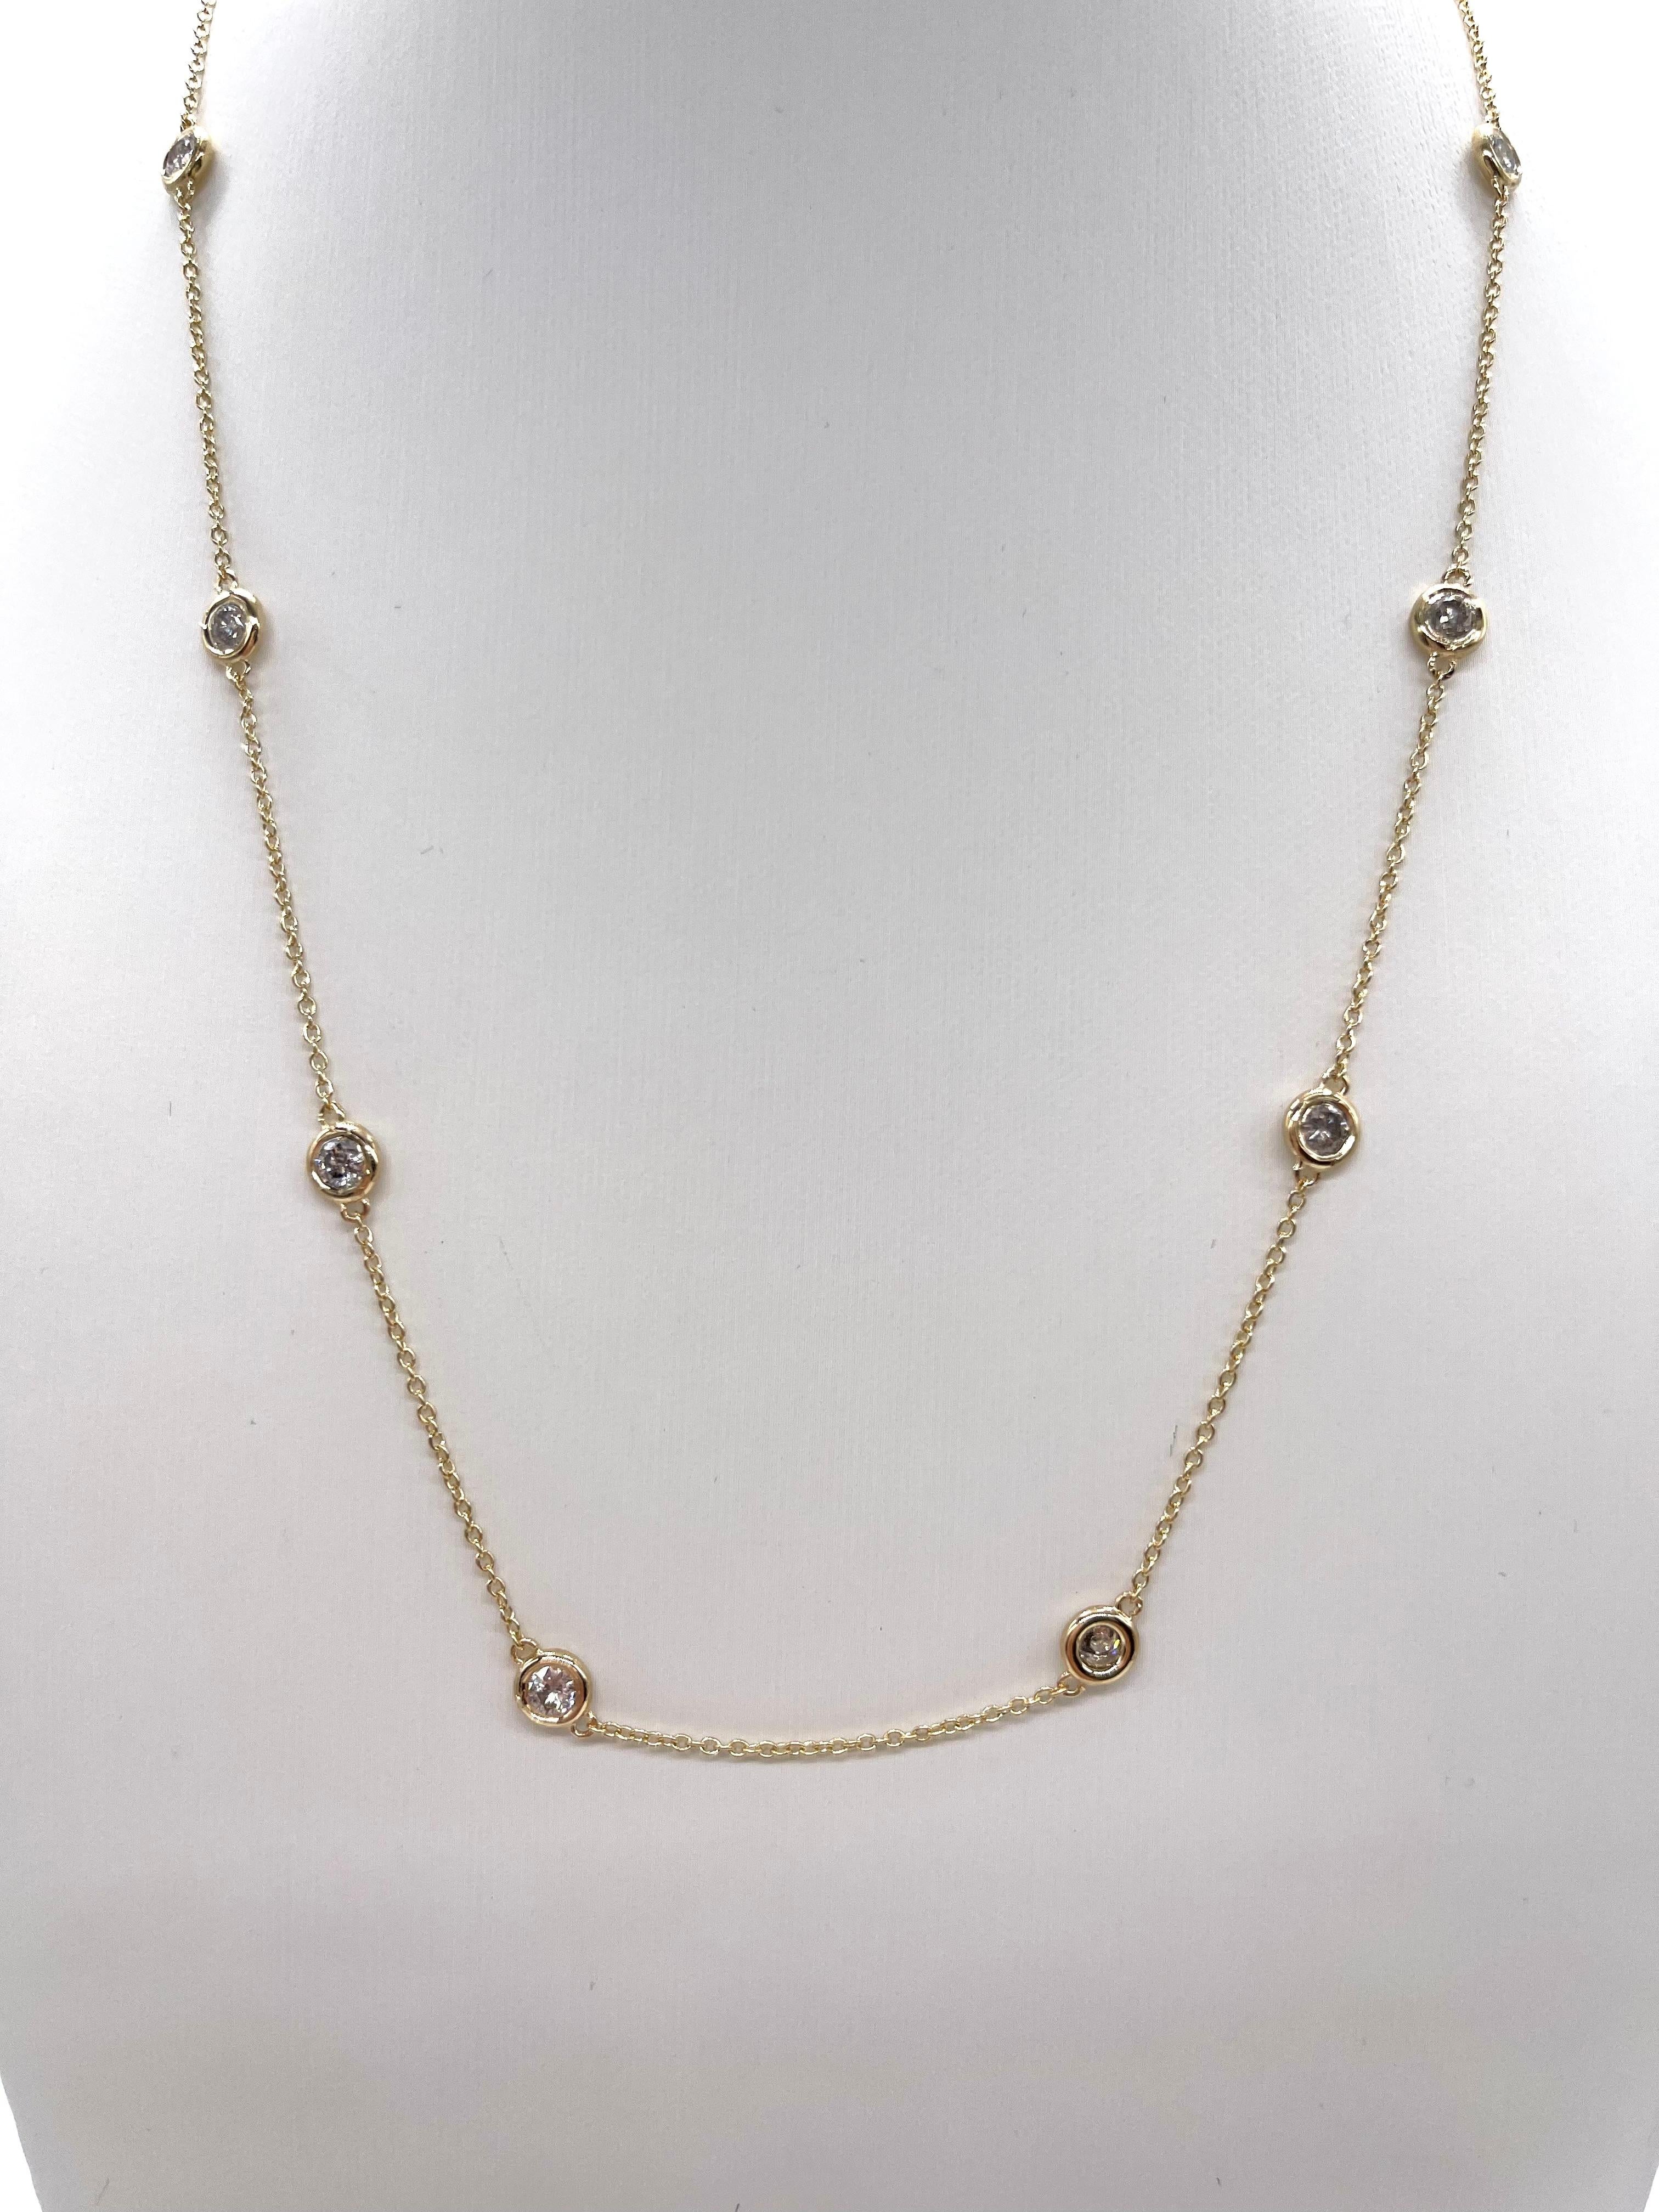 10 Station Diamond by the yard necklace set in Italian made 14K yellow gold. 
Total weight is 1.35 carats. Beautiful shiny stones. 
Length 16 inch 4.21 grams. Average H-I Natural Diamond

*Free shipping within U.S*